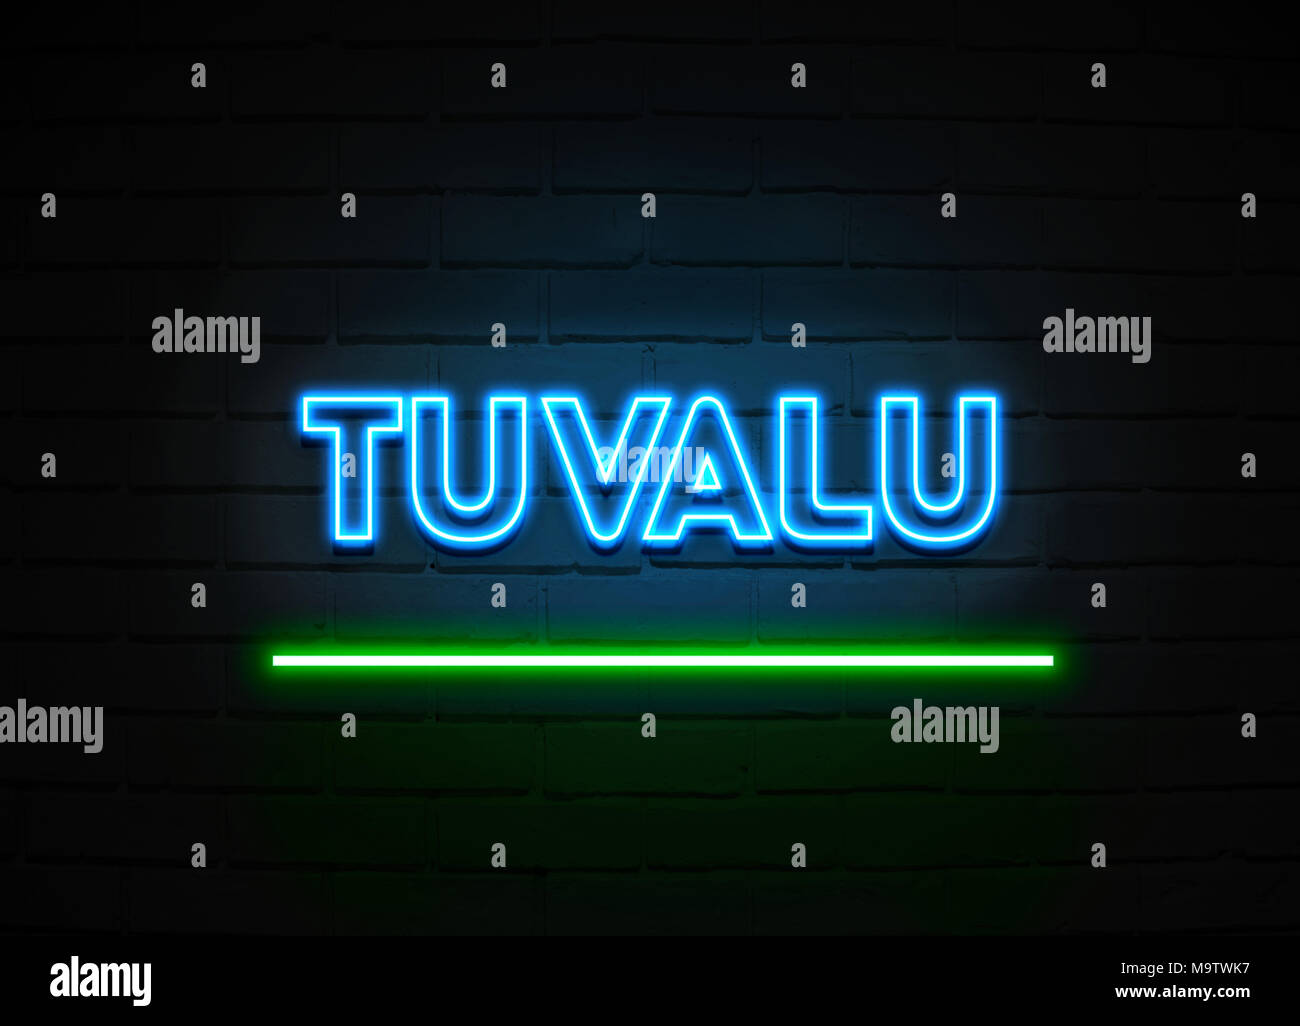 Tuvalu neon sign - Glowing Neon Sign on brickwall wall - 3D rendered royalty free stock illustration. Stock Photo